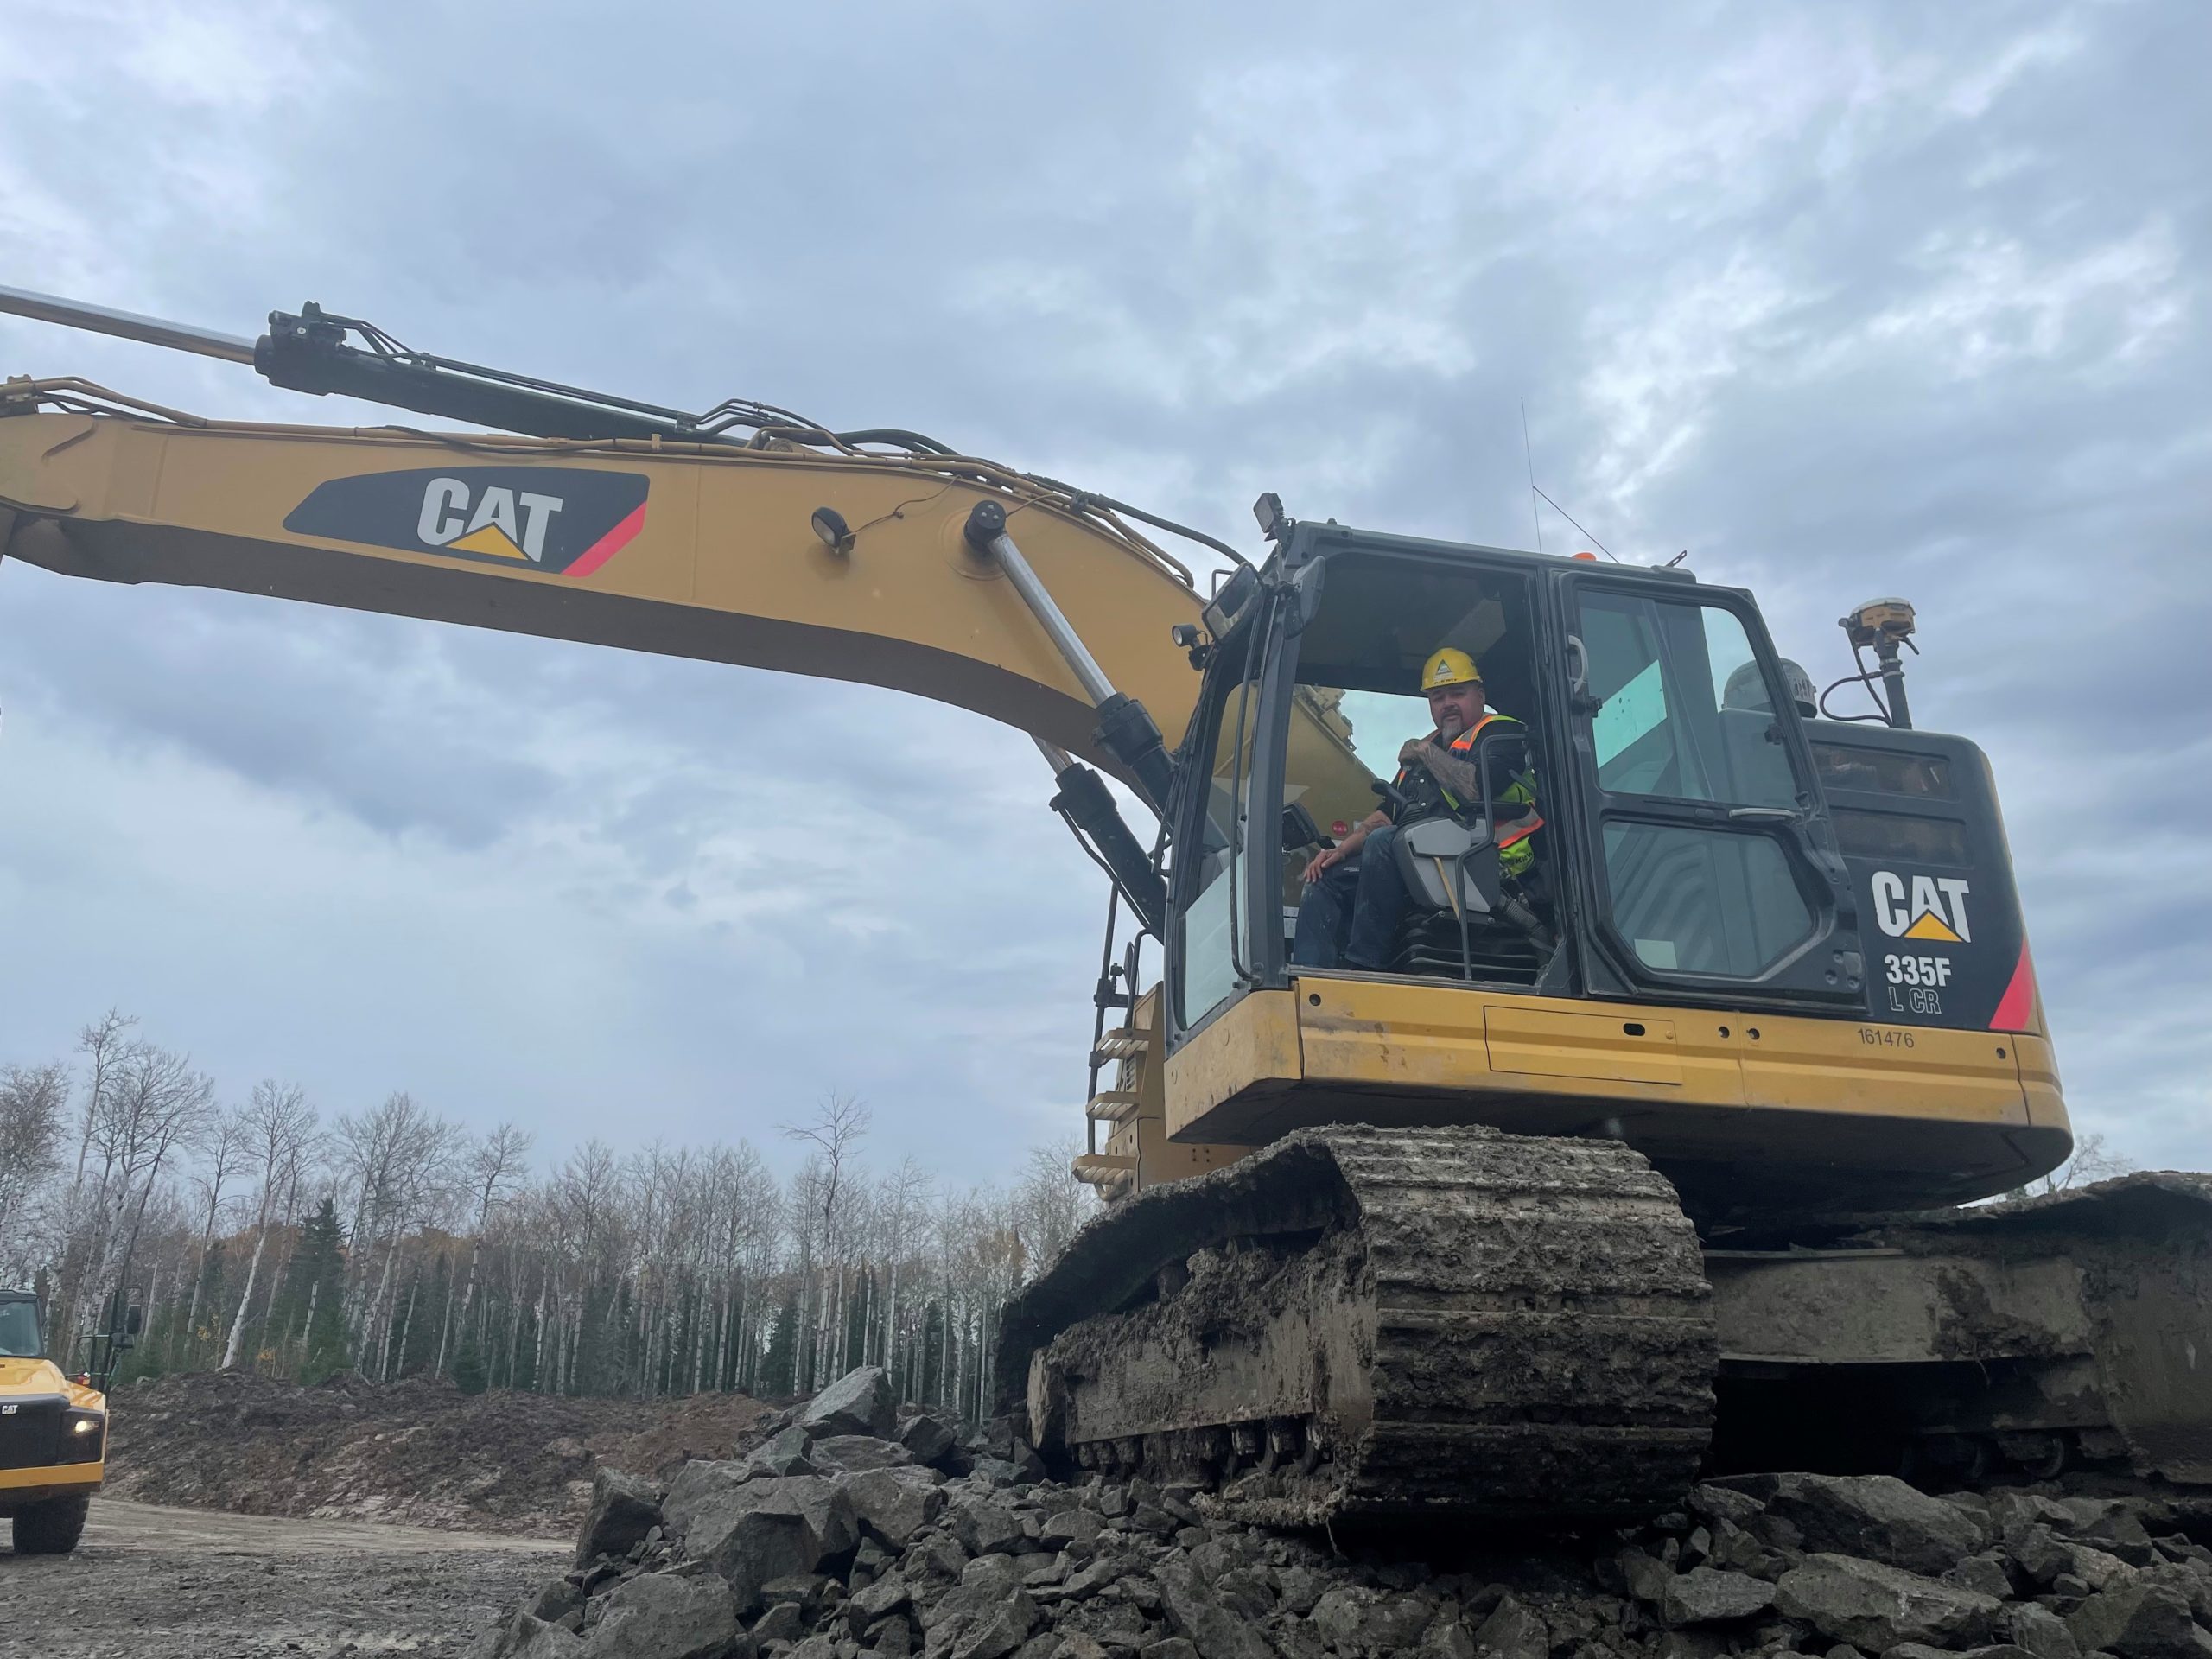 Real Levesque operating a 335F excavator.